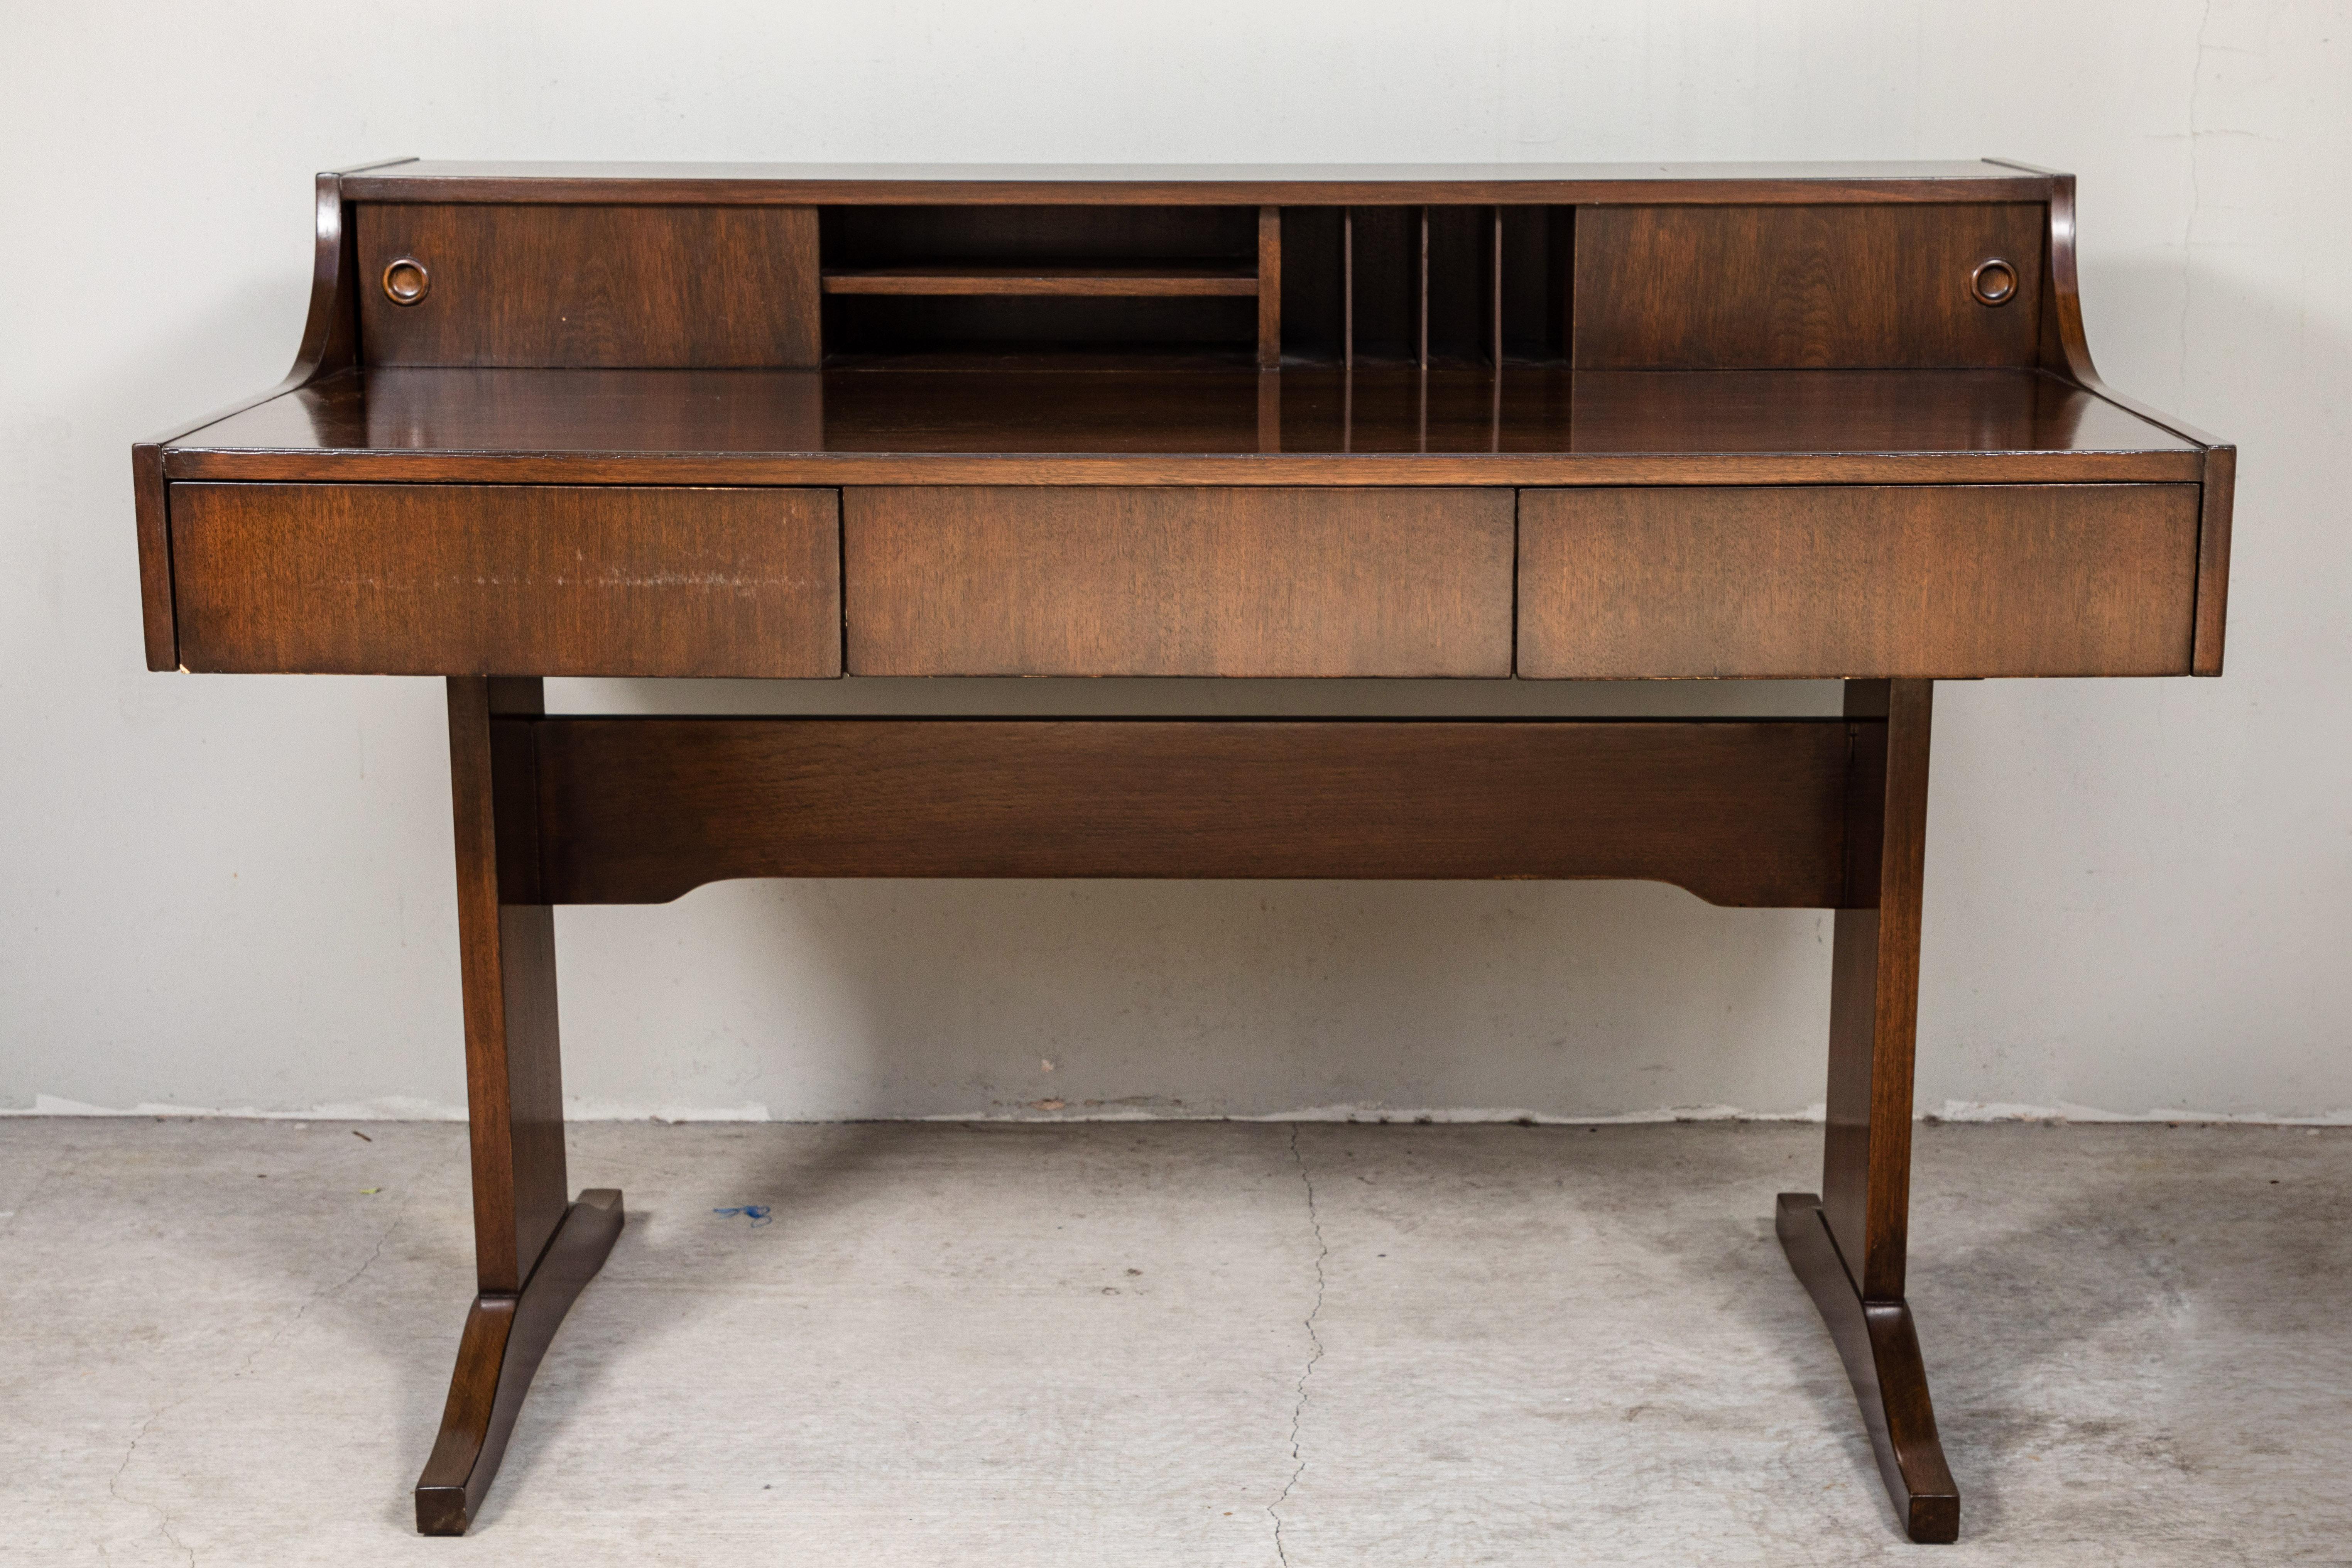 Handsome Danish modern desk, in walnut, 1960s, by Peter Lovig. Desk has three drawers across the front and multiple cubby holes in the back.